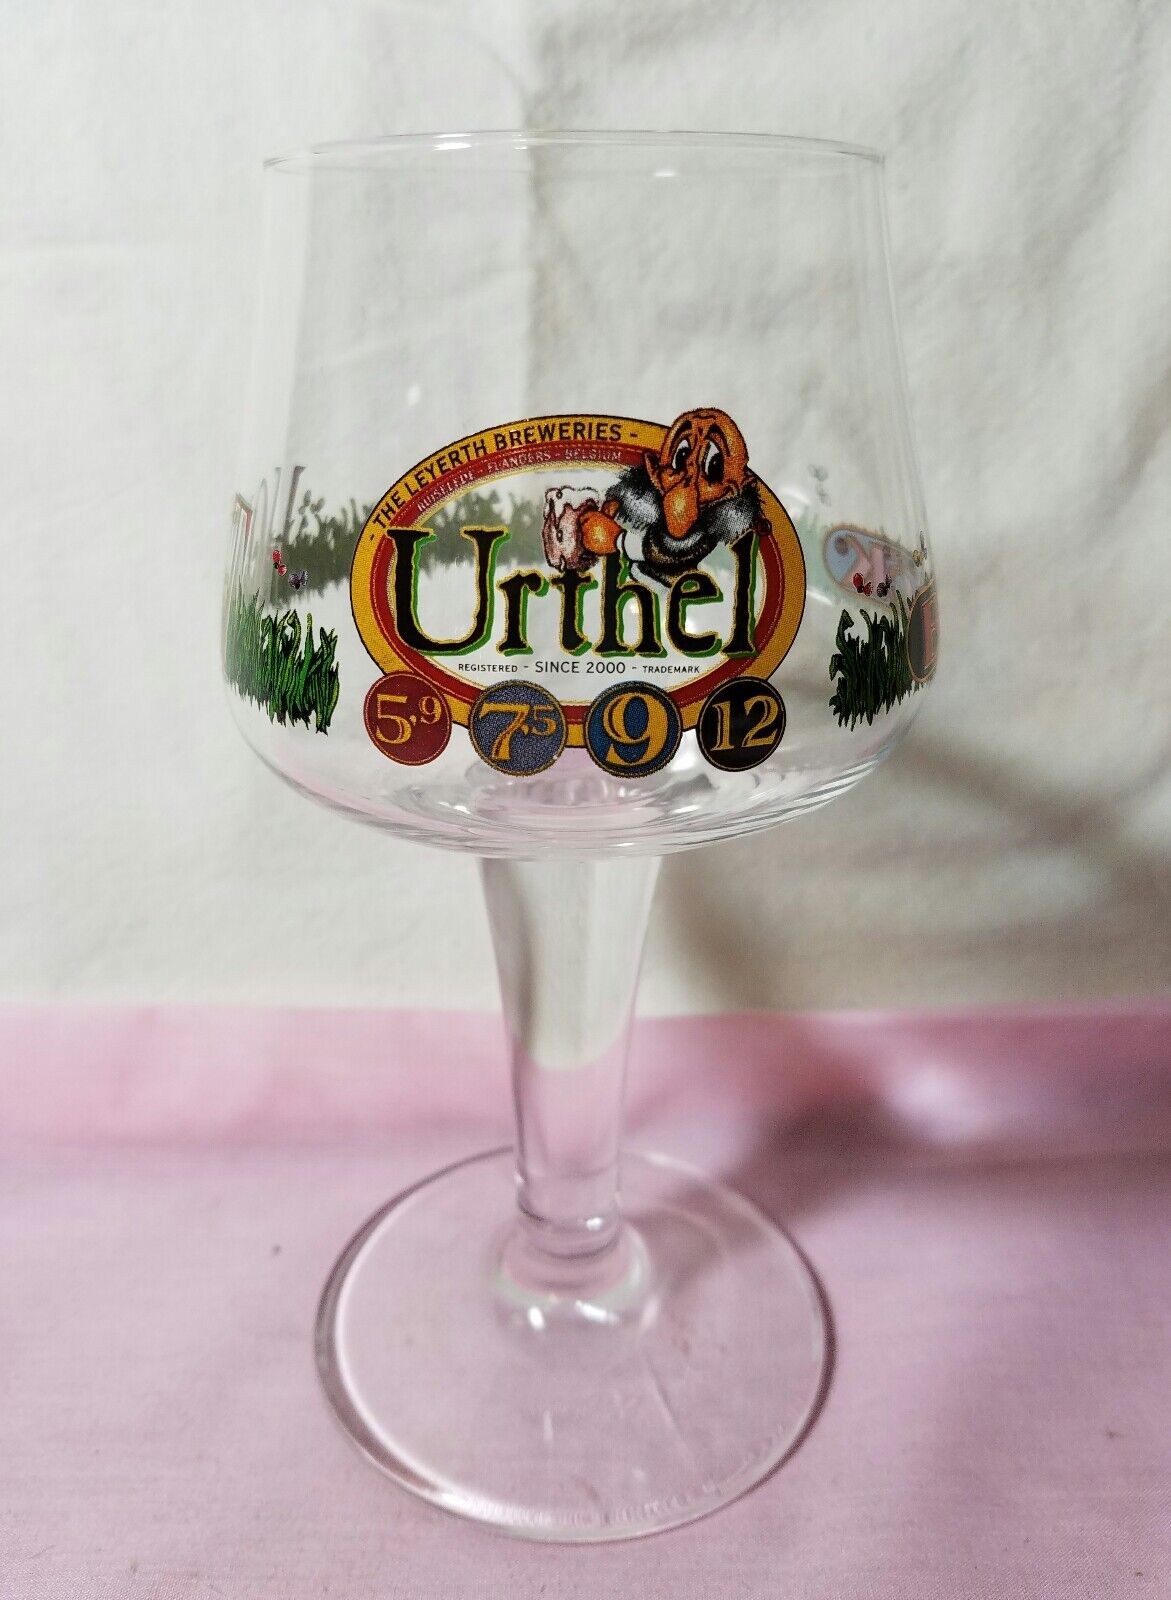 The Leyerth Brewery Urthel Beer Glass Hop-It Pache Vlaemse Bock 